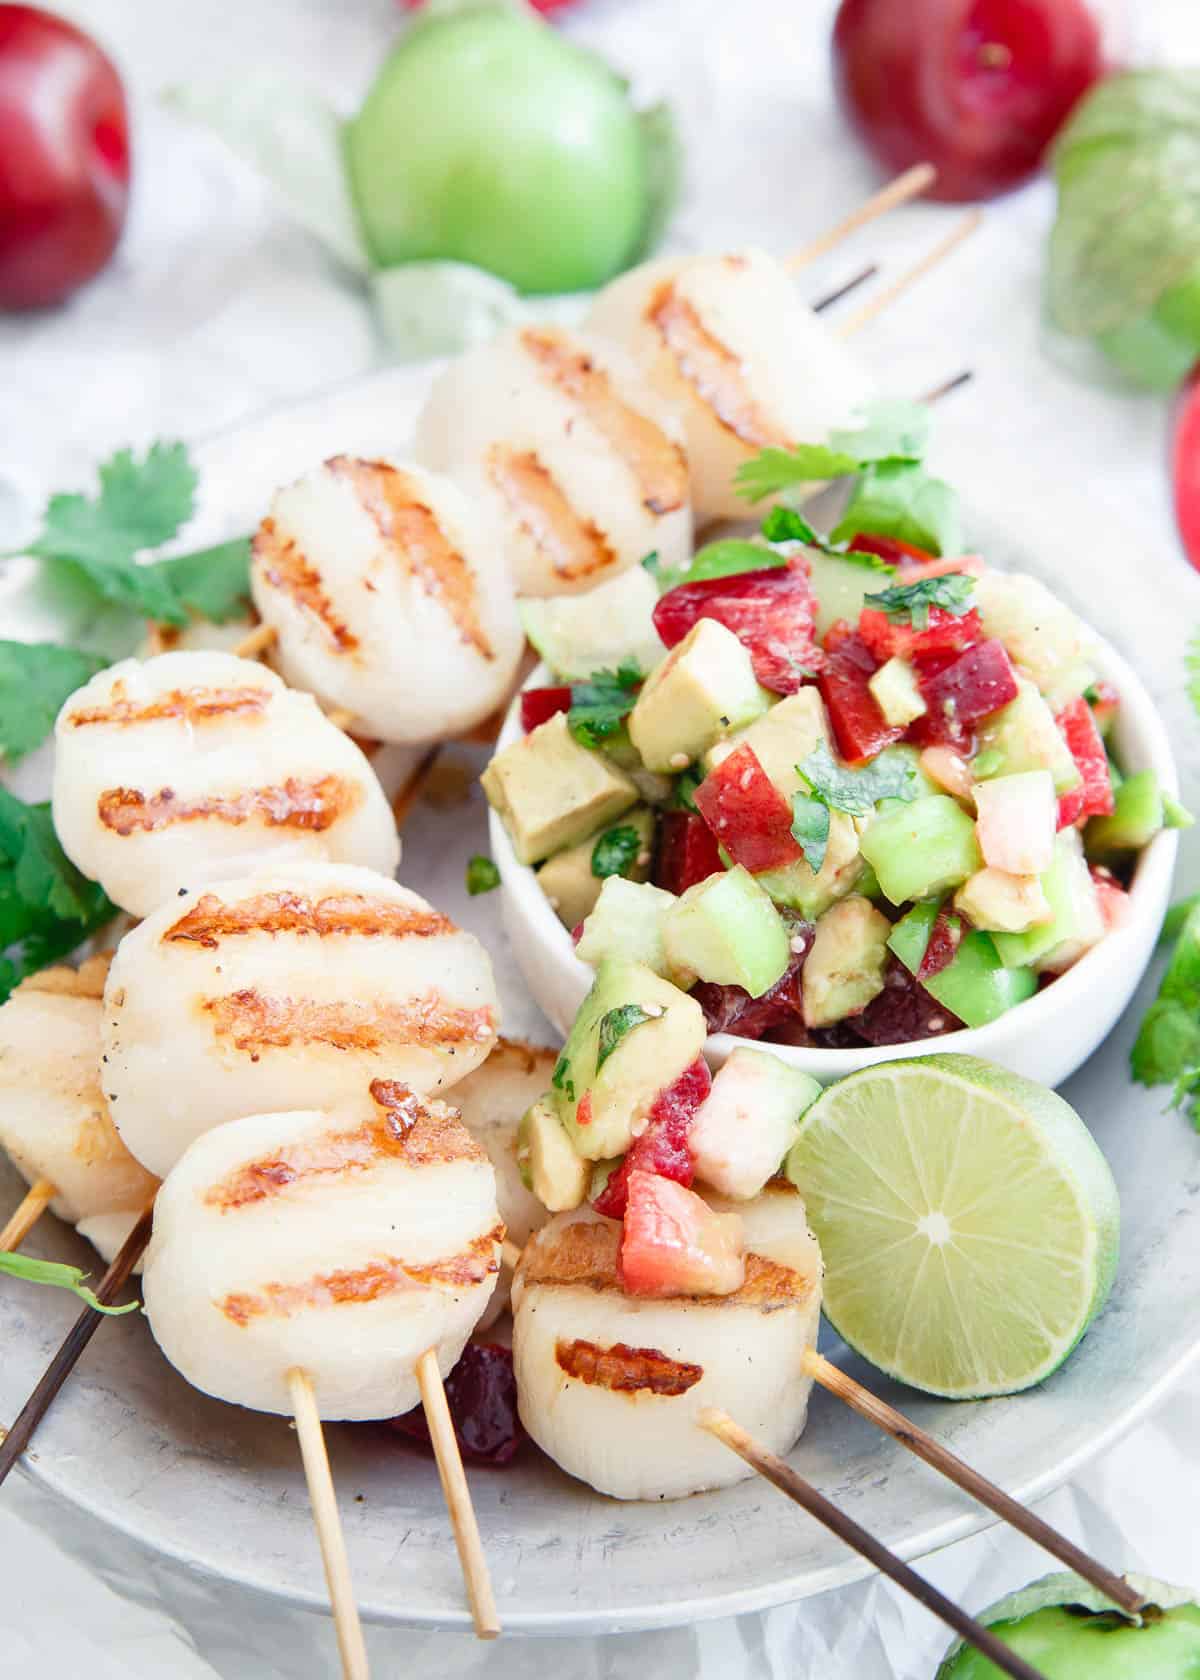 Grilled Scallops with Tomatillo Plum Salsa make a light and delicious summer meal.